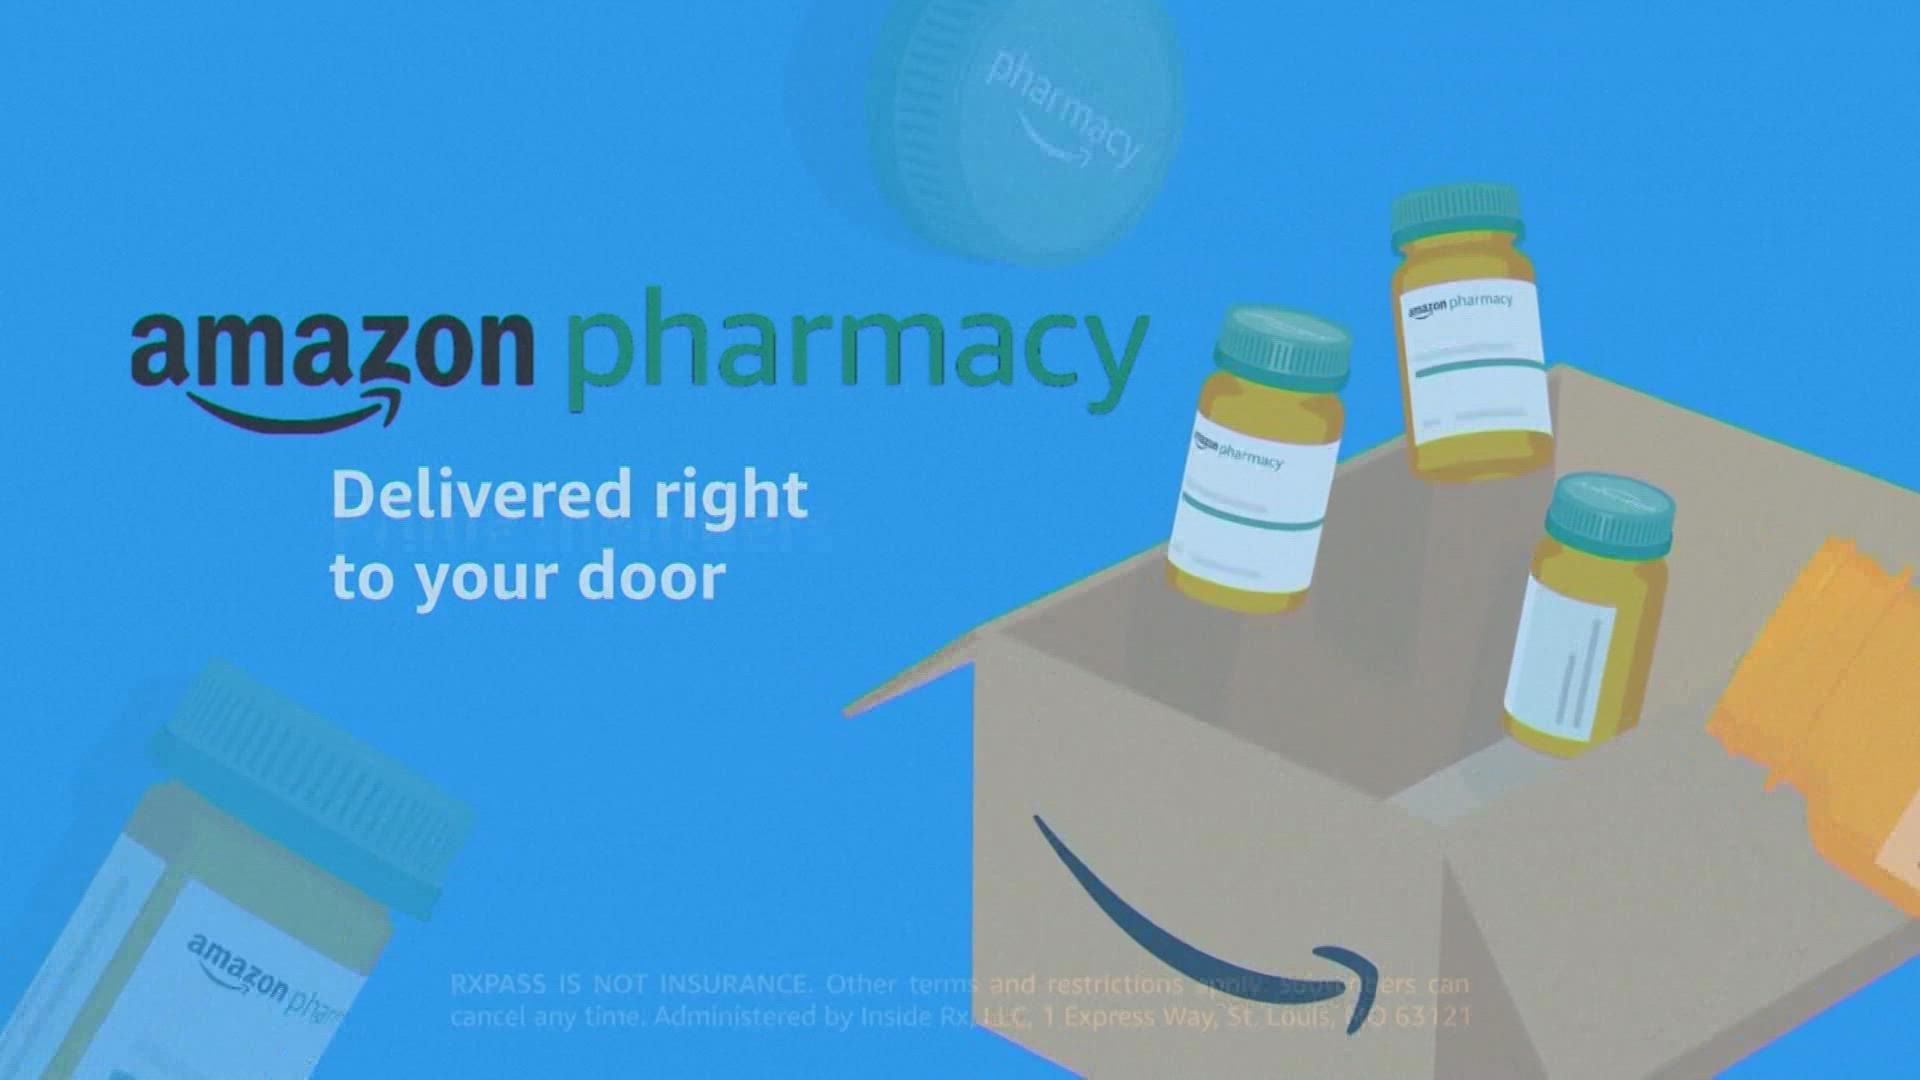 Amazon said people will pay $5 a month to fill as many prescriptions as they need from a list of about 50 generic meds.